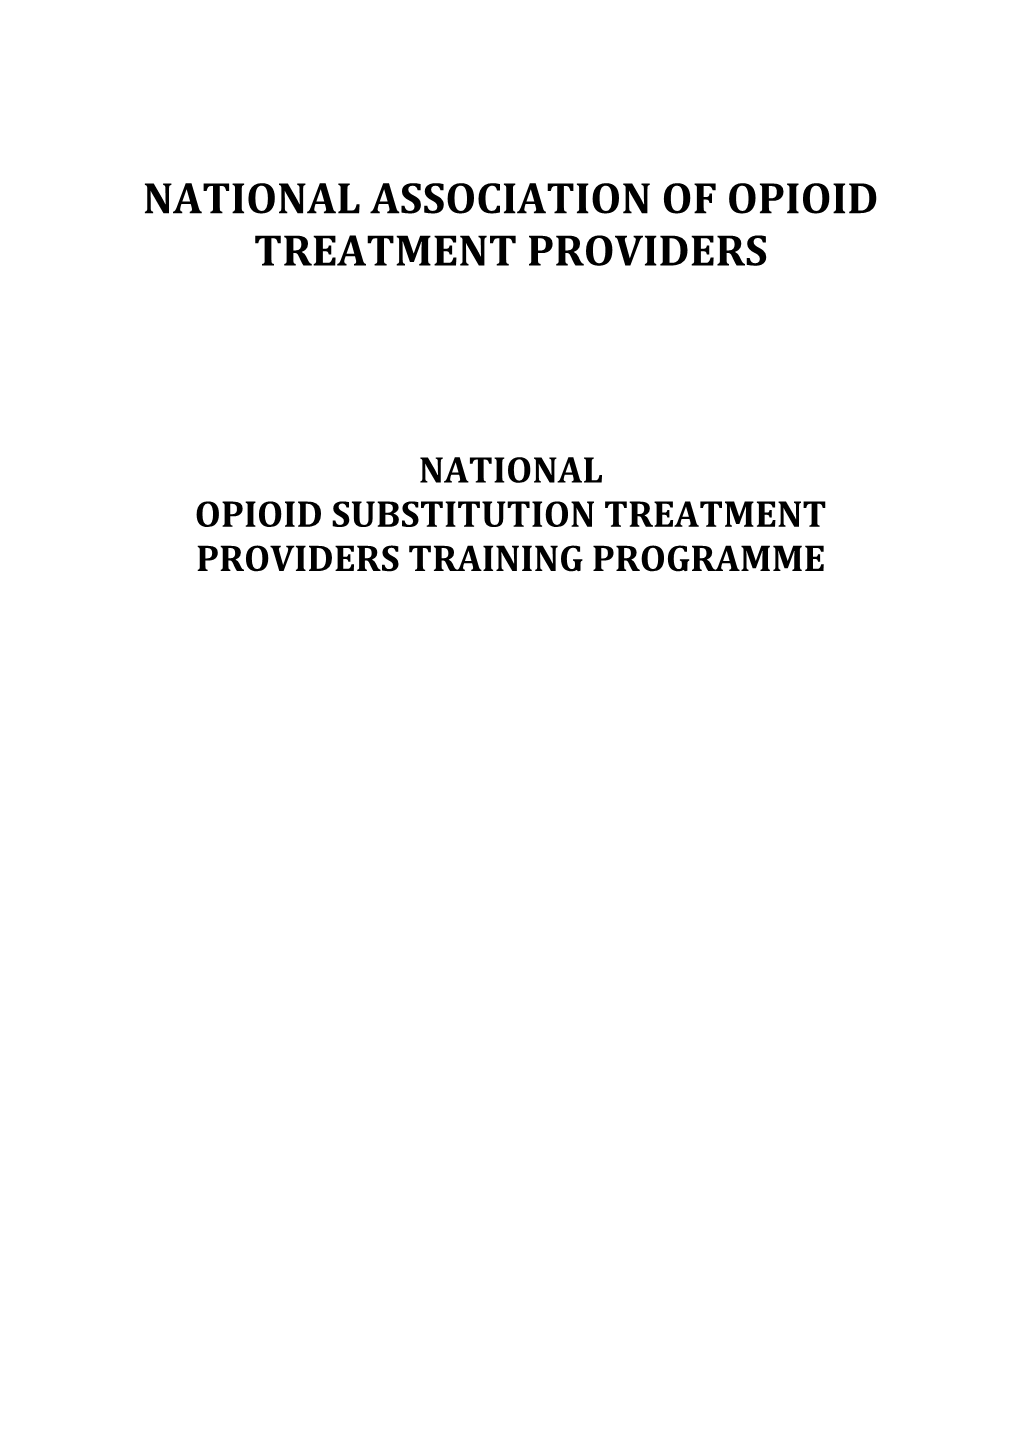 National Association of Opioid Treatment Providers